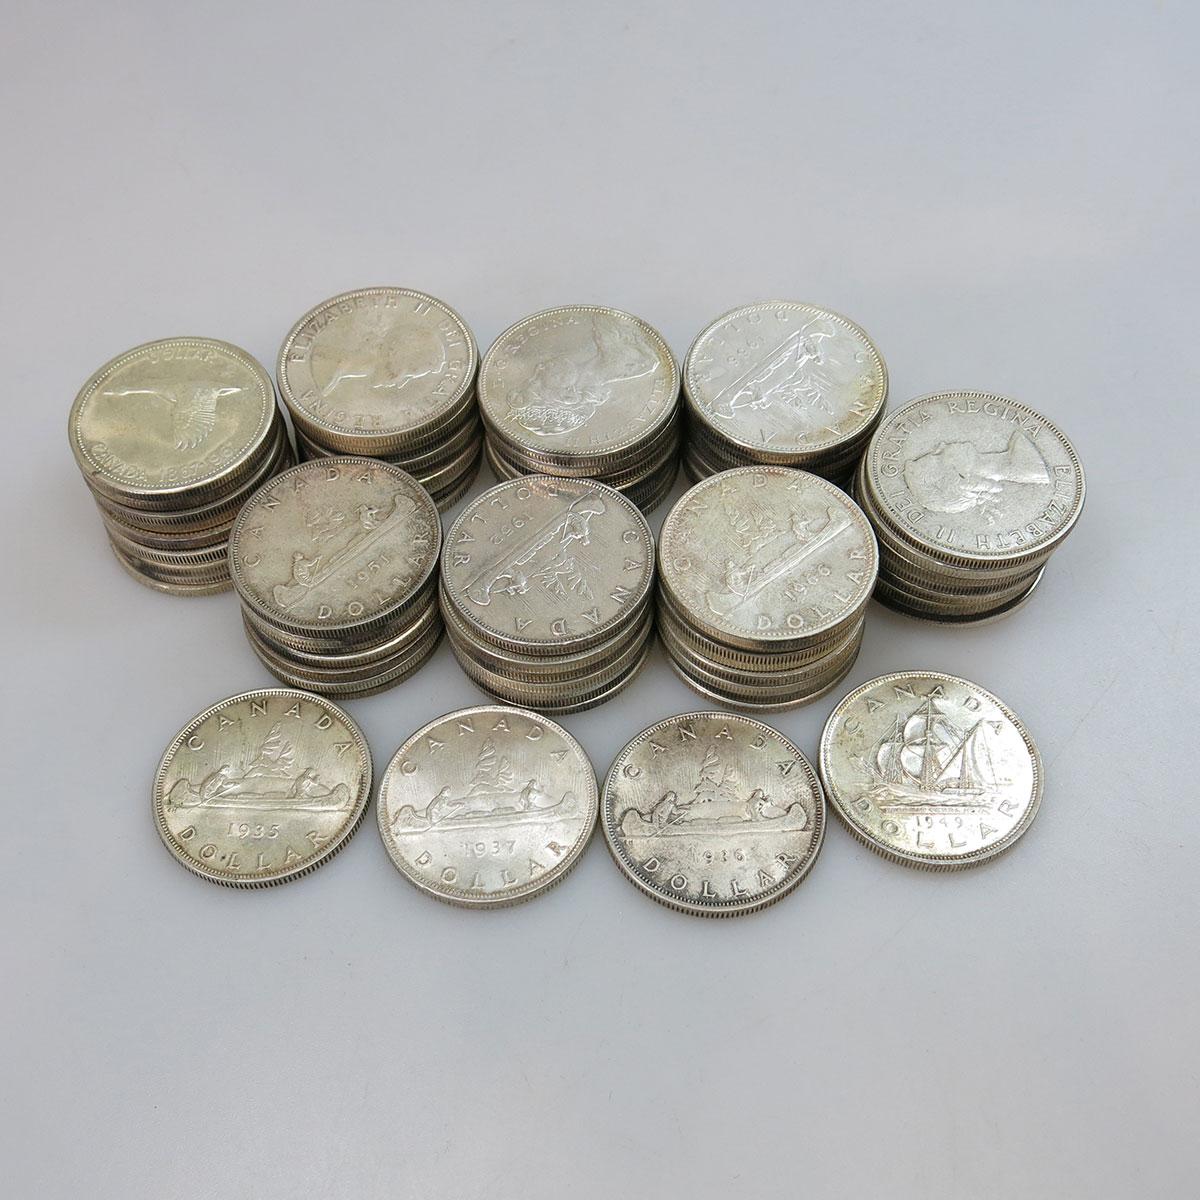 71 Canadian Silver Dollars